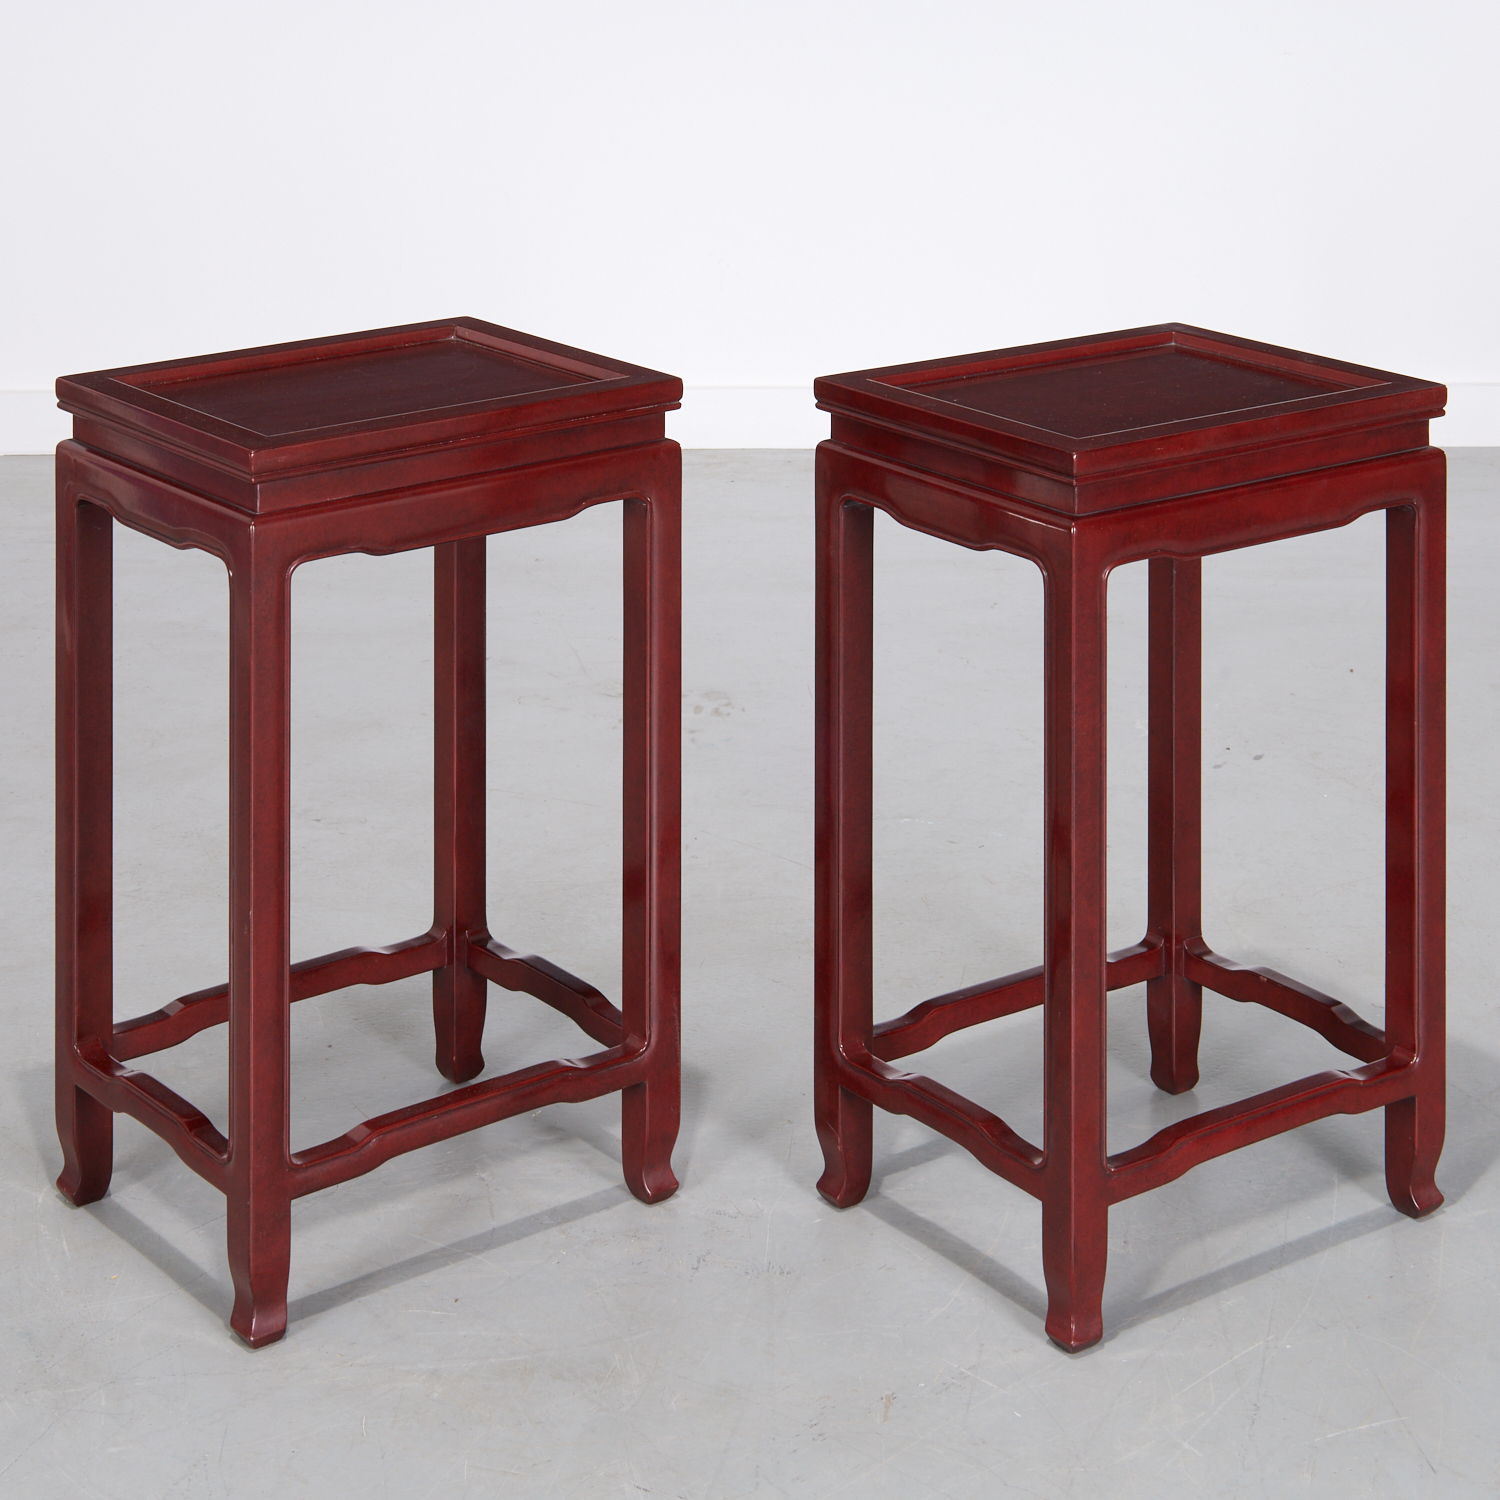 PAIR CHINESE STYLE RED LACQUER